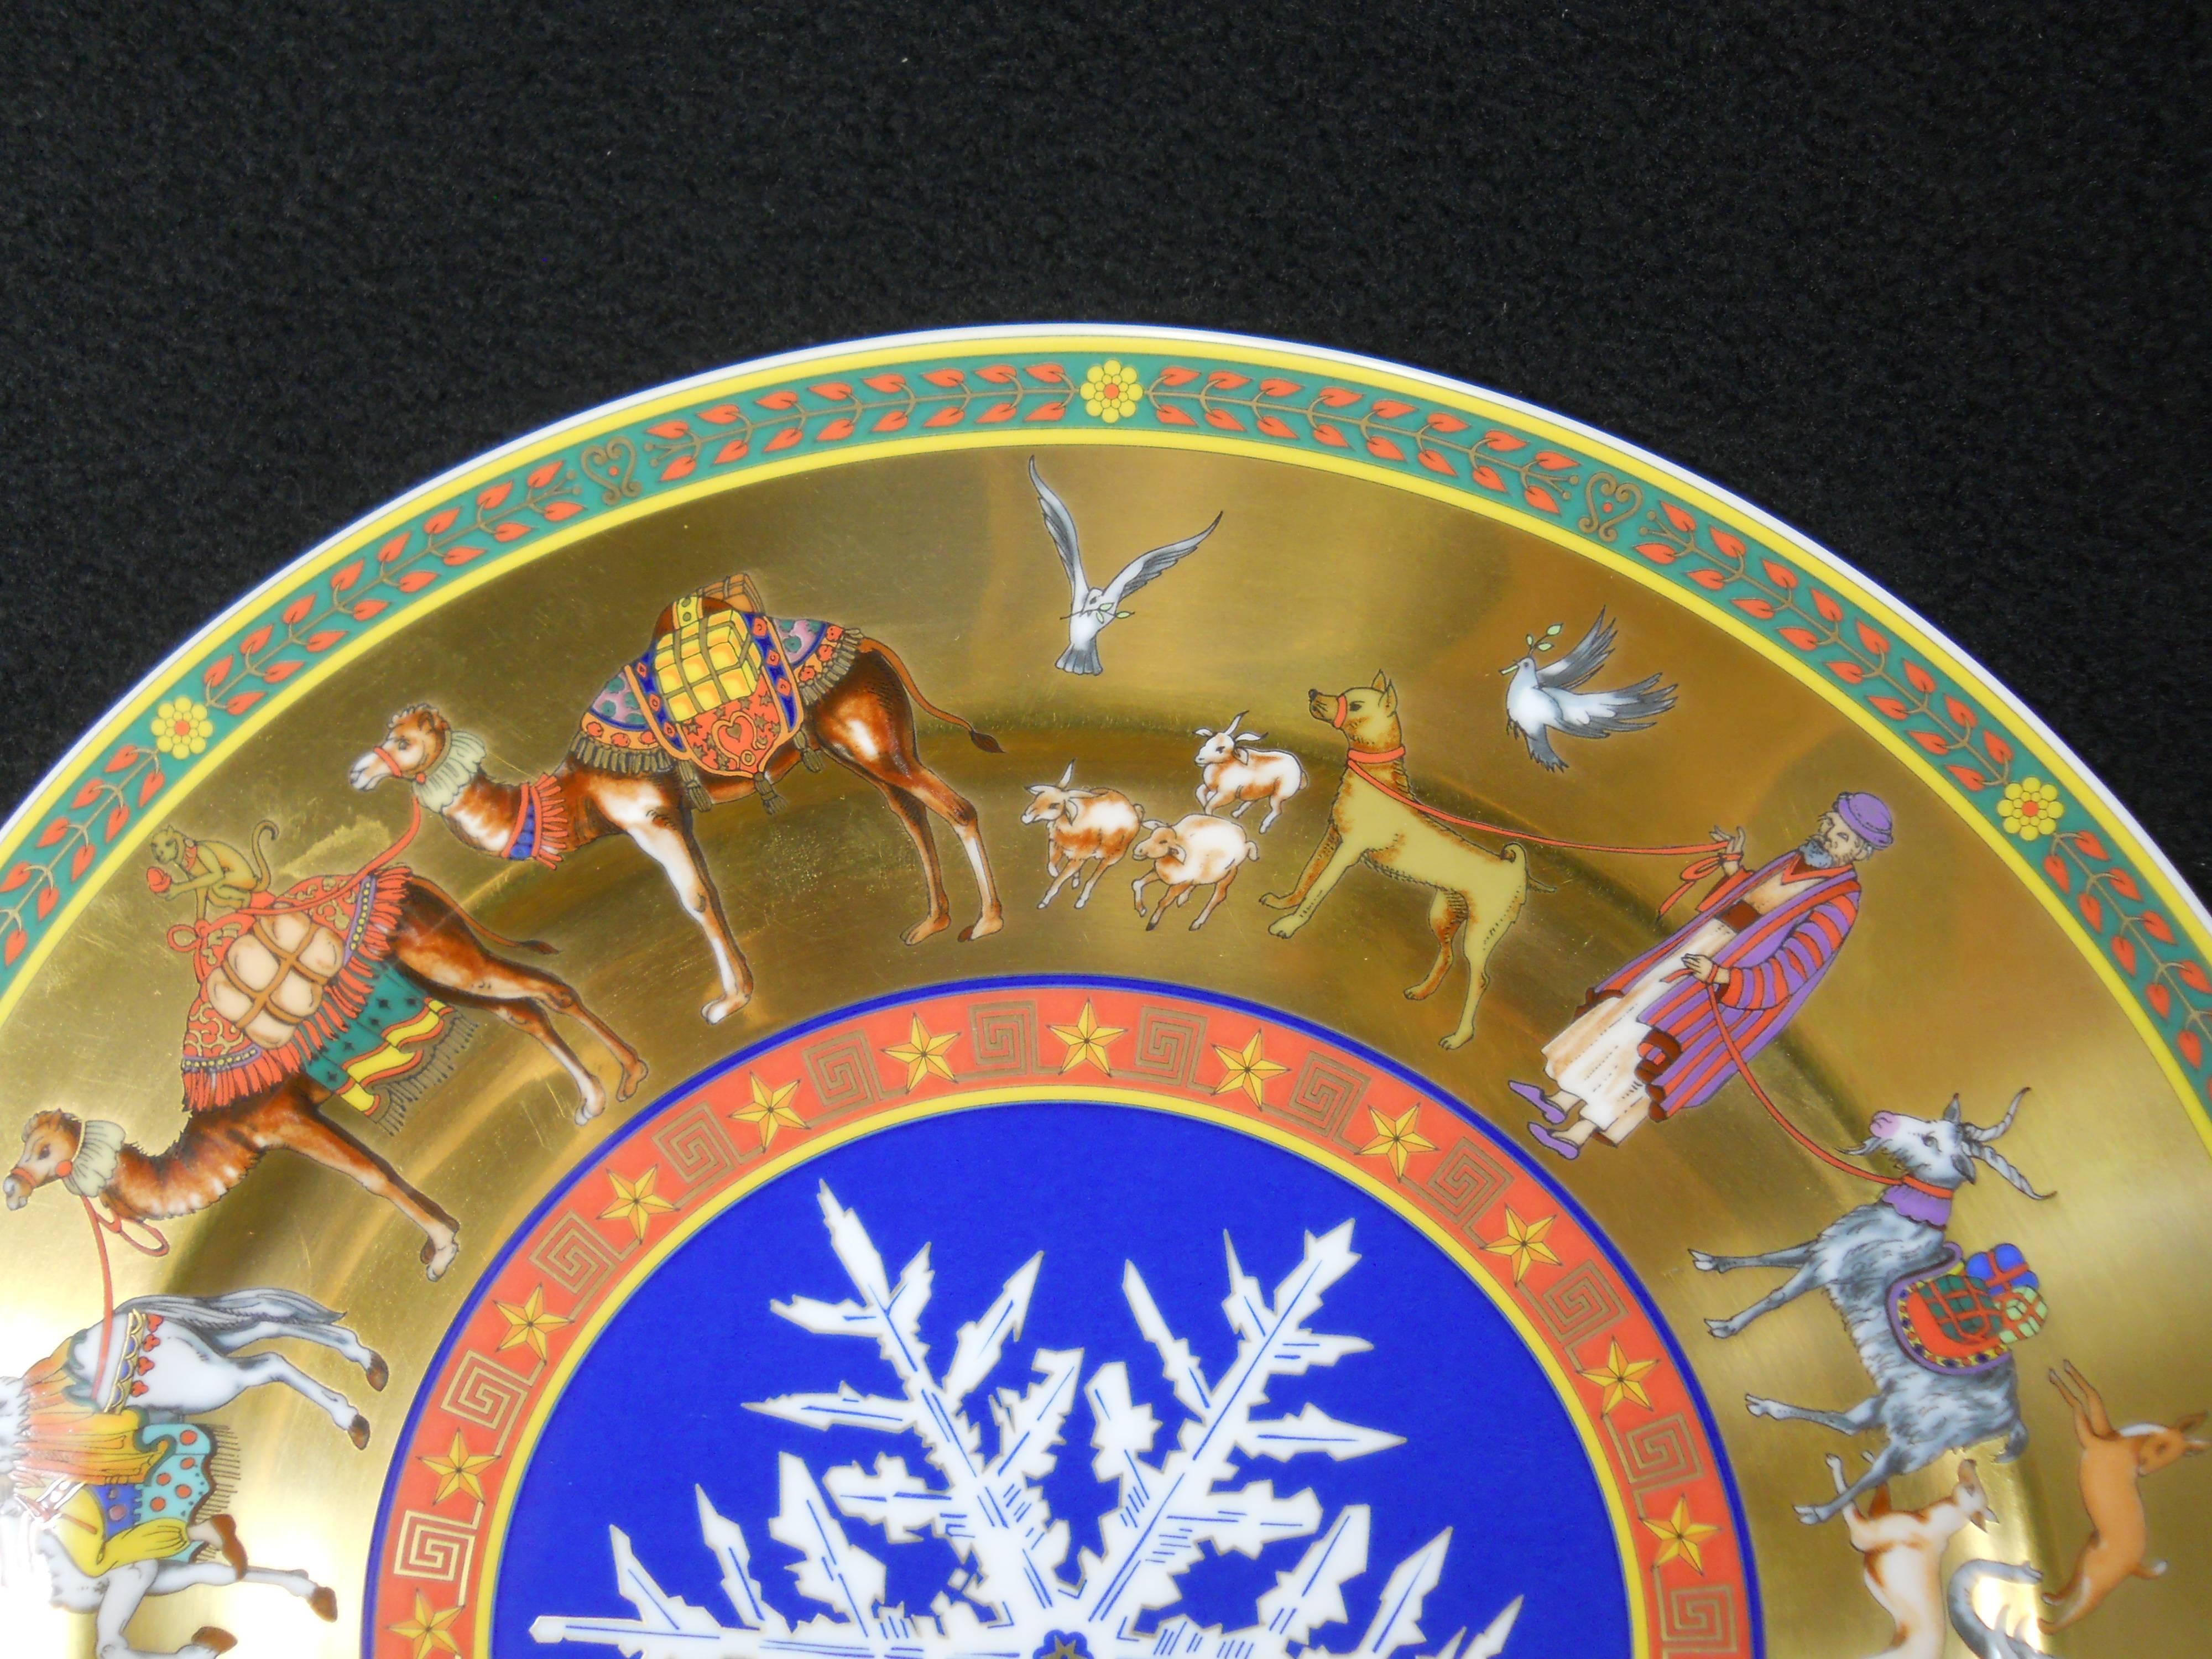 This beautiful large Rosenthal Versace Christmas plate of 1998 measures 12